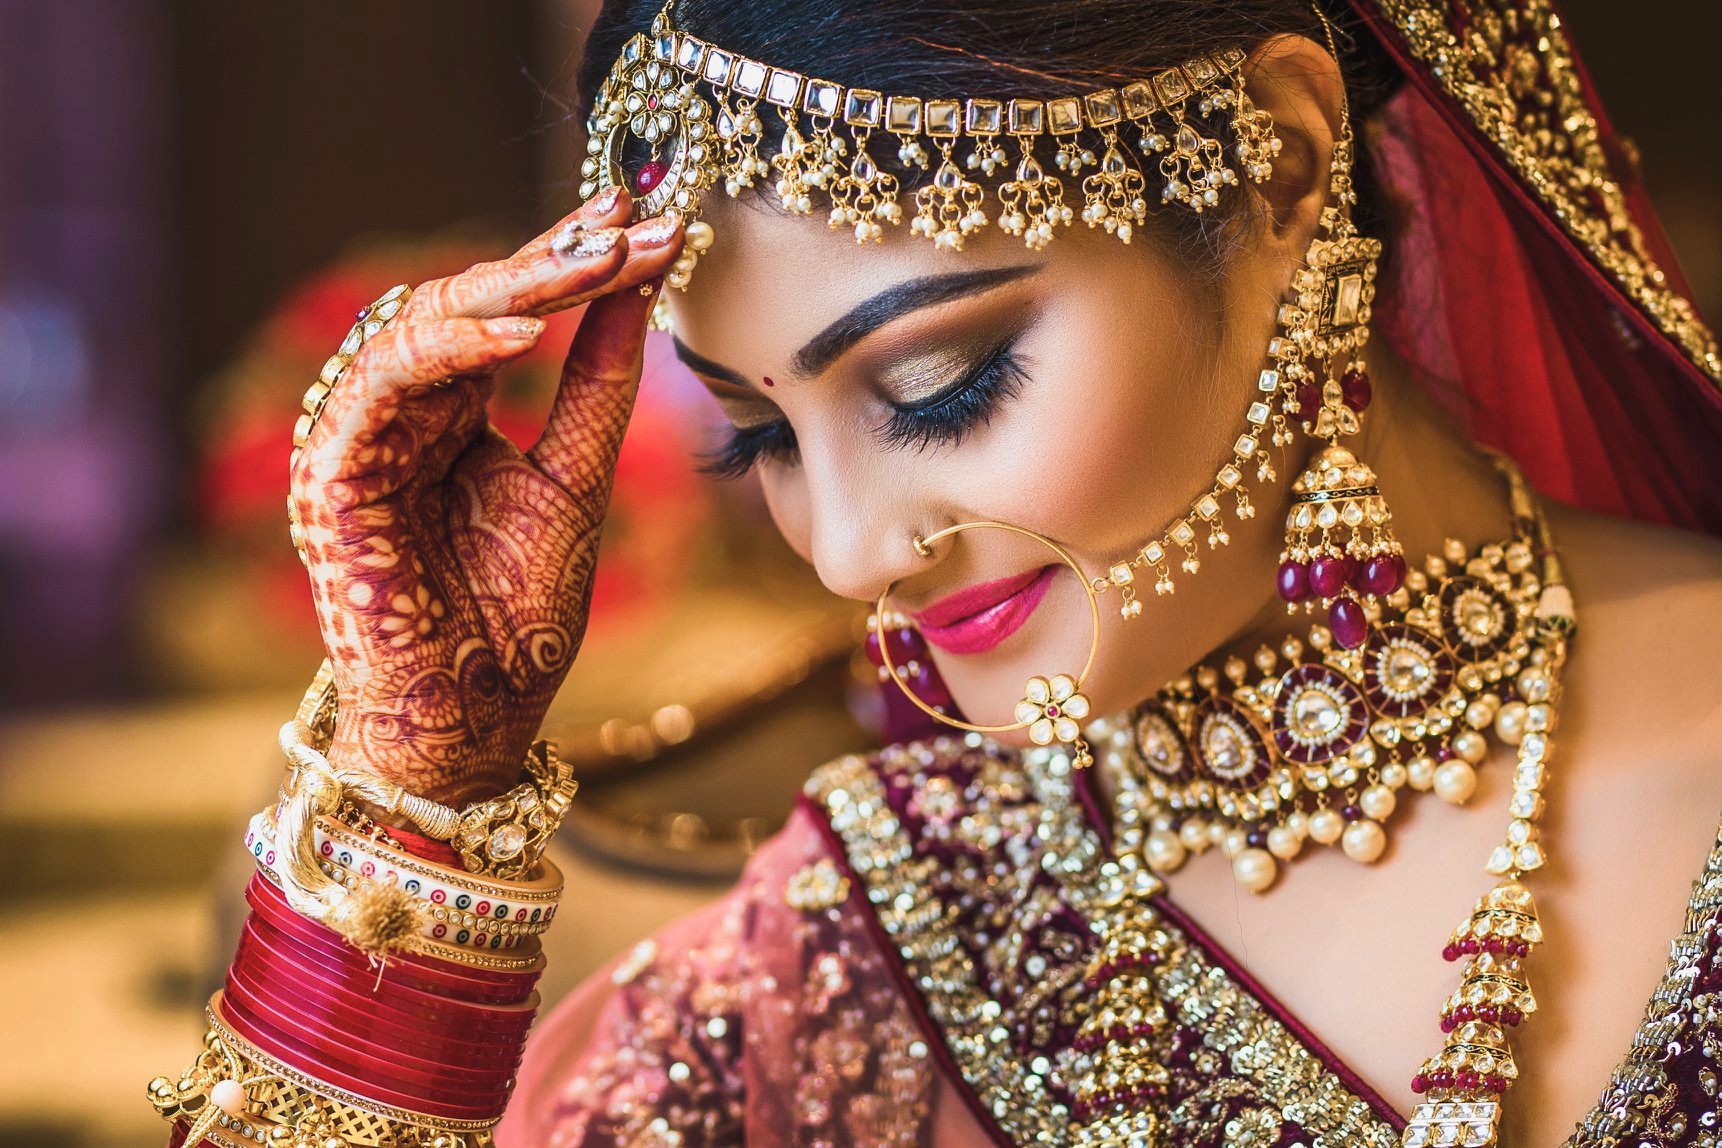 Pin by Niloufer Khan on Bridal fashion India/Pakistan | Indian wedding photography  poses, Indian bride poses, Indian wedding bride